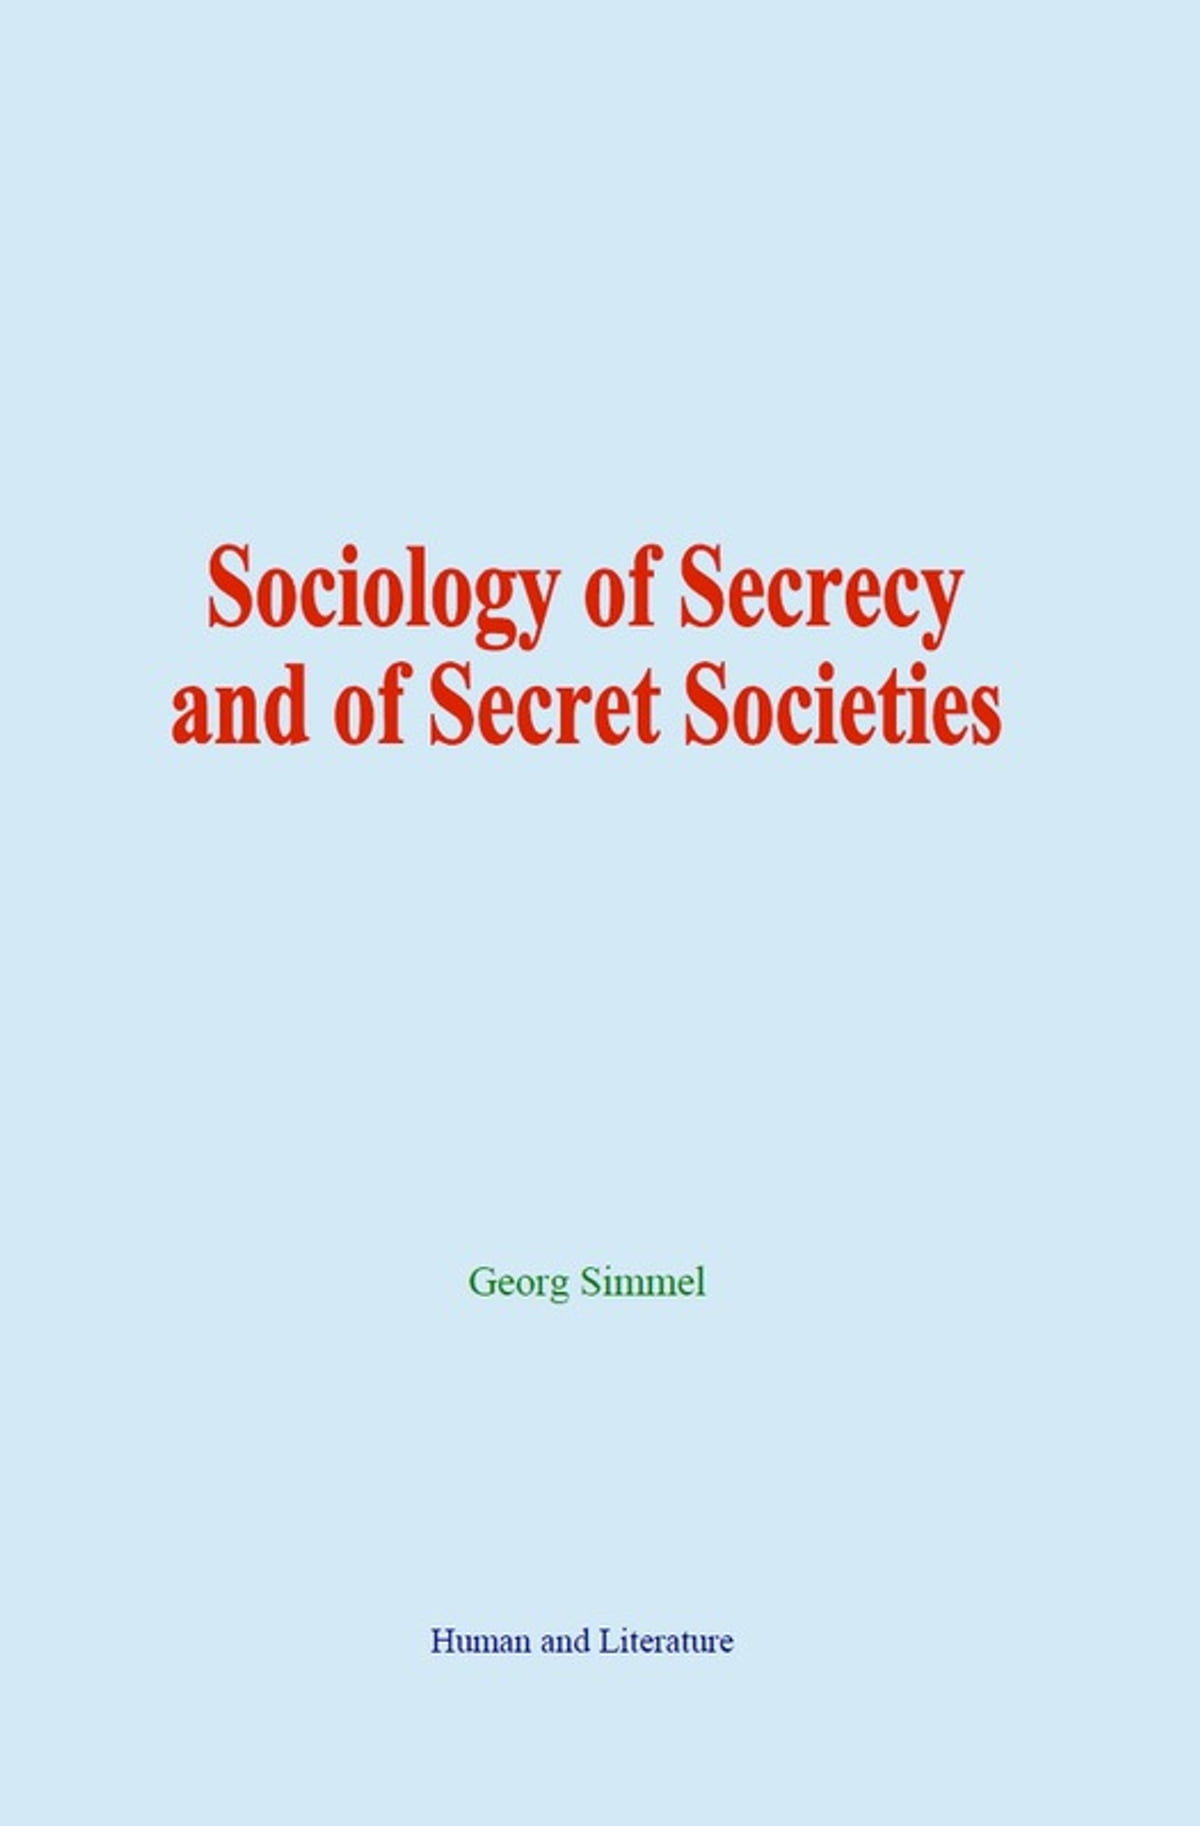 Sociology of Secrecy and of Secret Societies, by Georg Simmel